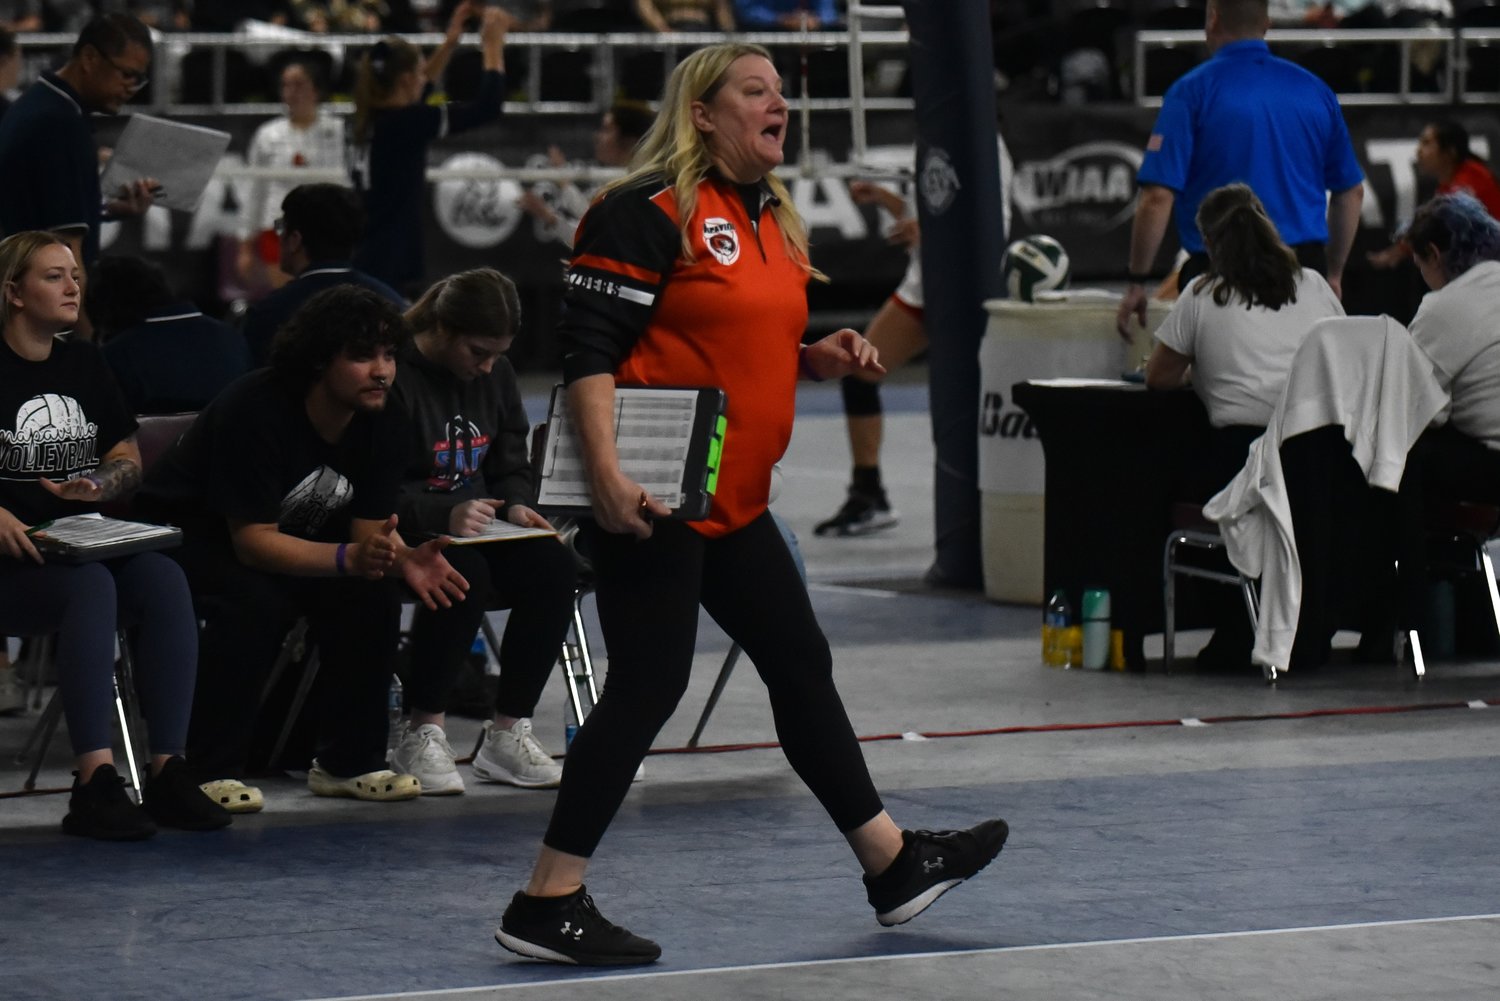 Napavine coach Monica Dailey shouts instructions to her team during the Tigers' four-set win over Forks on Nov. 10 in Yakima.